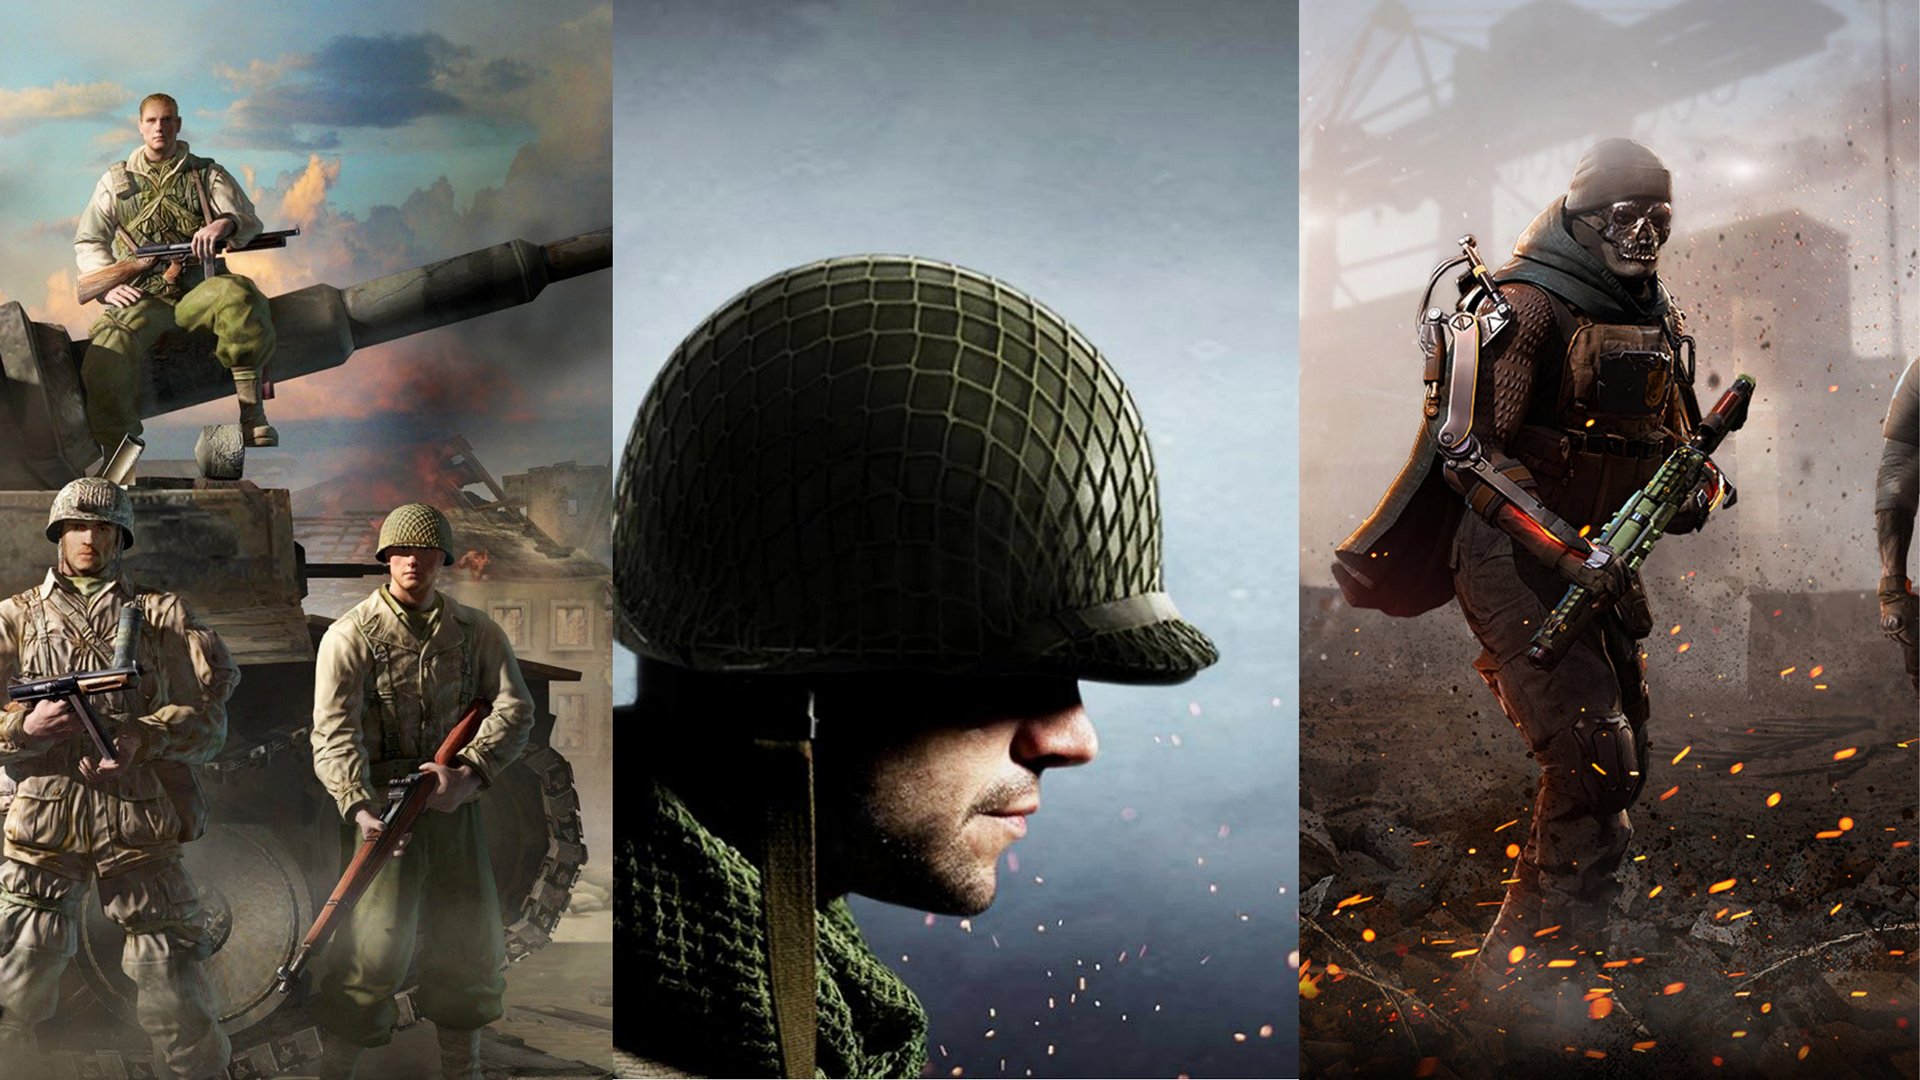 22 Best War Games For Android +(Download Link) - ویرگول